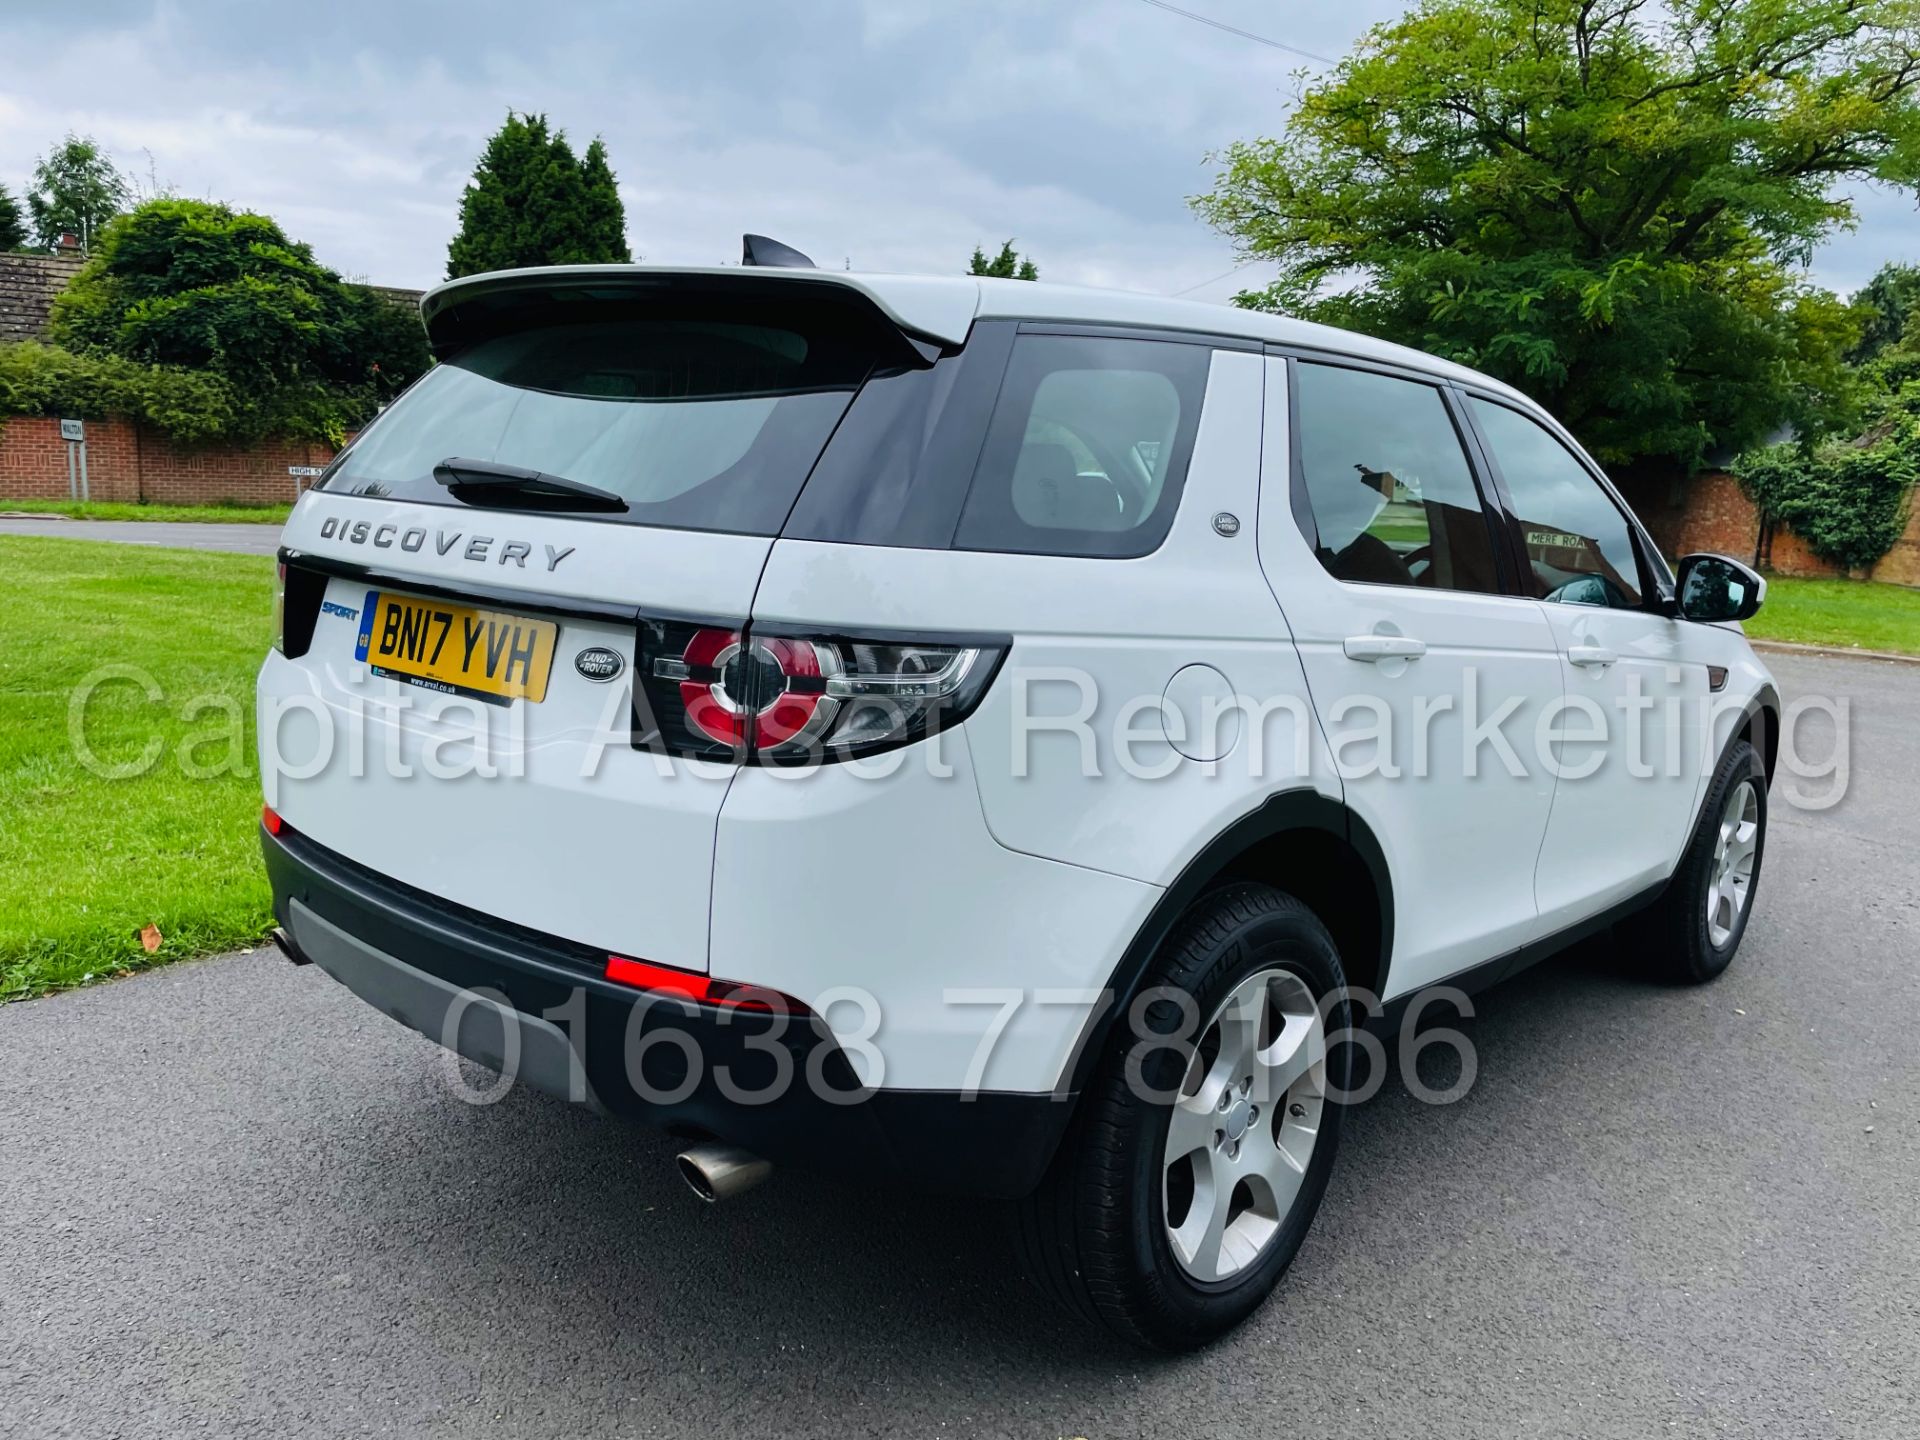 (On Sale) LAND ROVER DISCOVERY SPORT *SE TECH* SUV (2017 -EURO 6) '2.0 TD4 - STOP/START' (1 OWNER) - Image 12 of 52